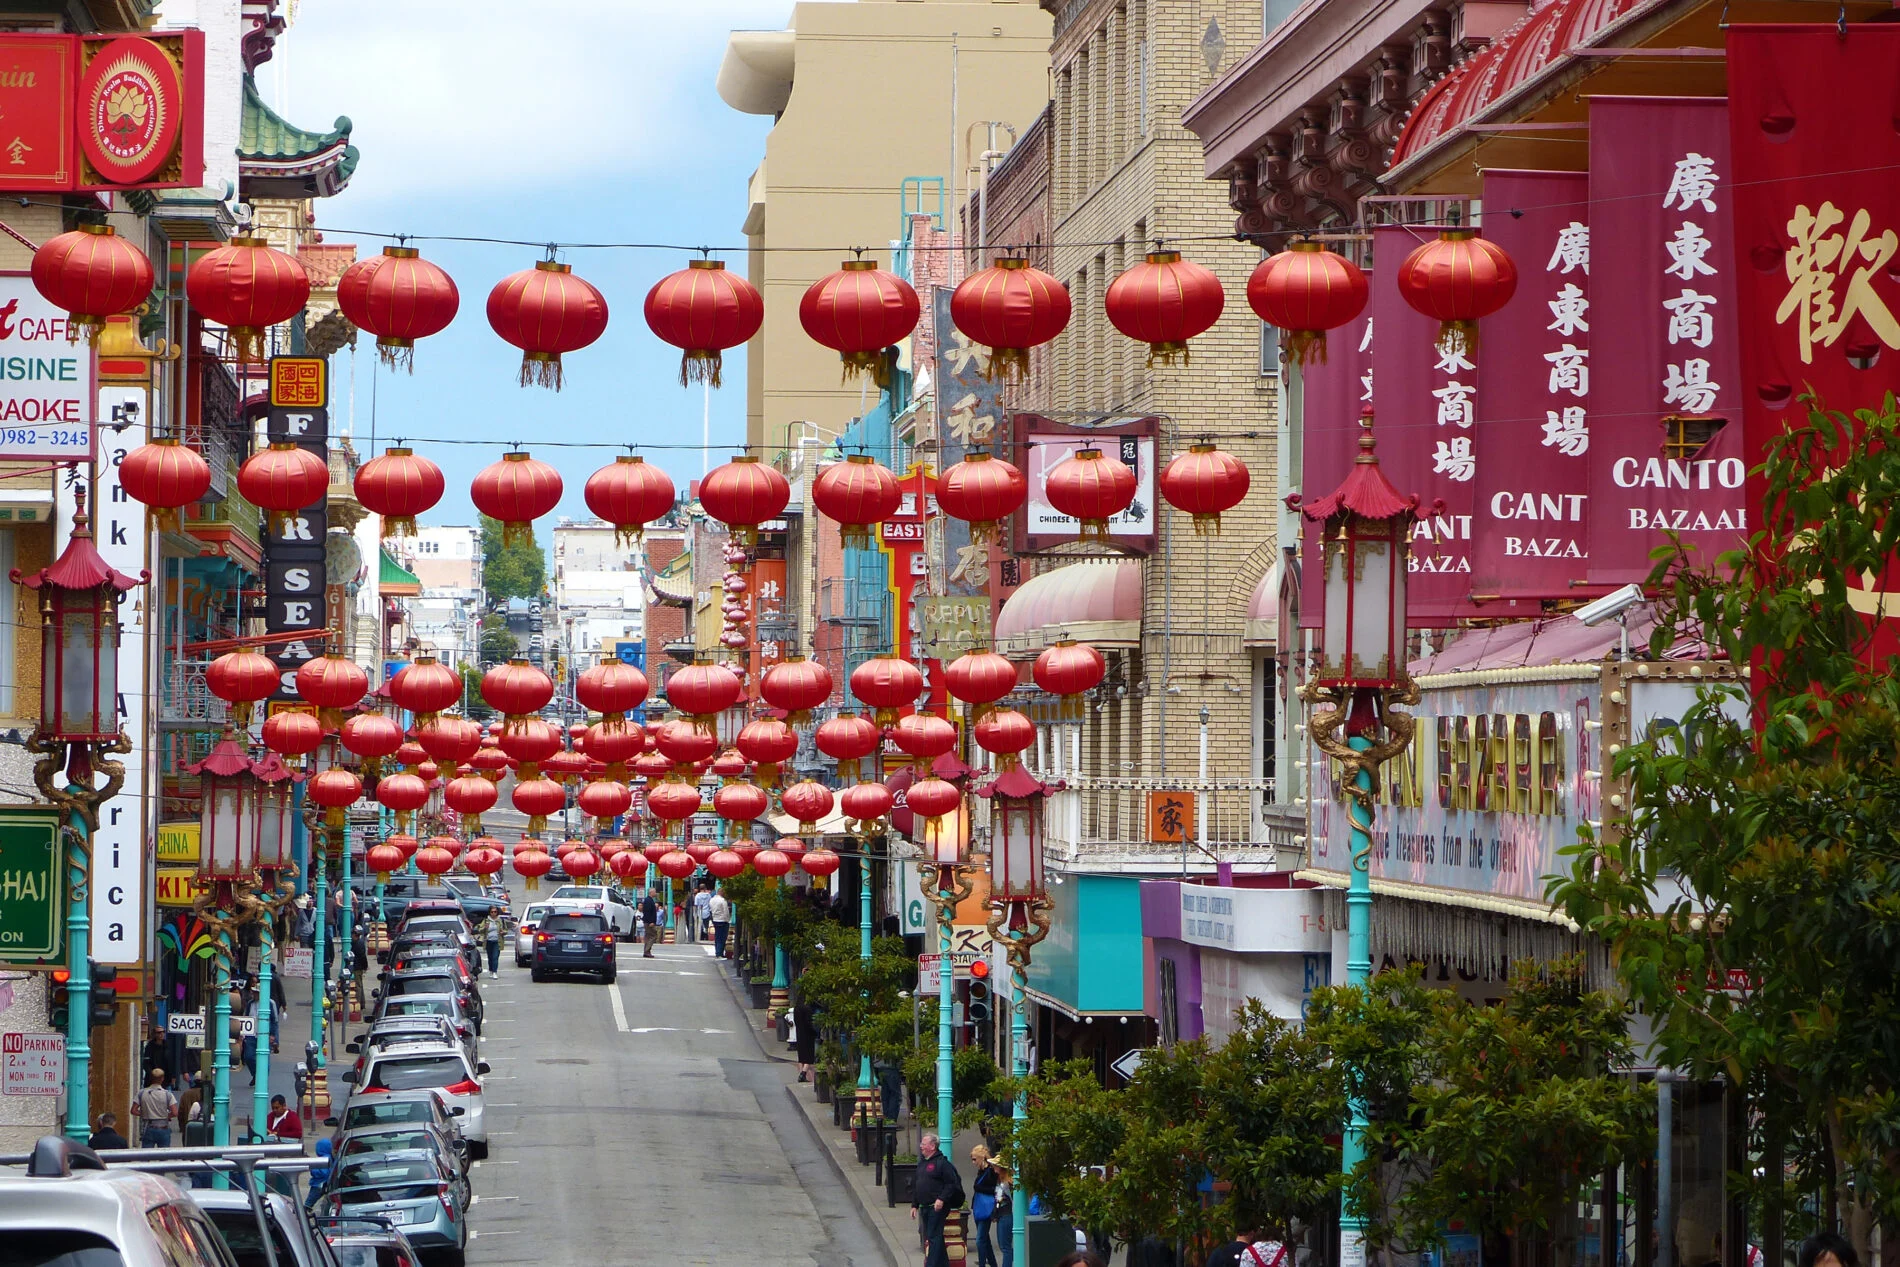 San Francisco’s Chinatown with row after row of red lanterns hanging over Grant Avenue.